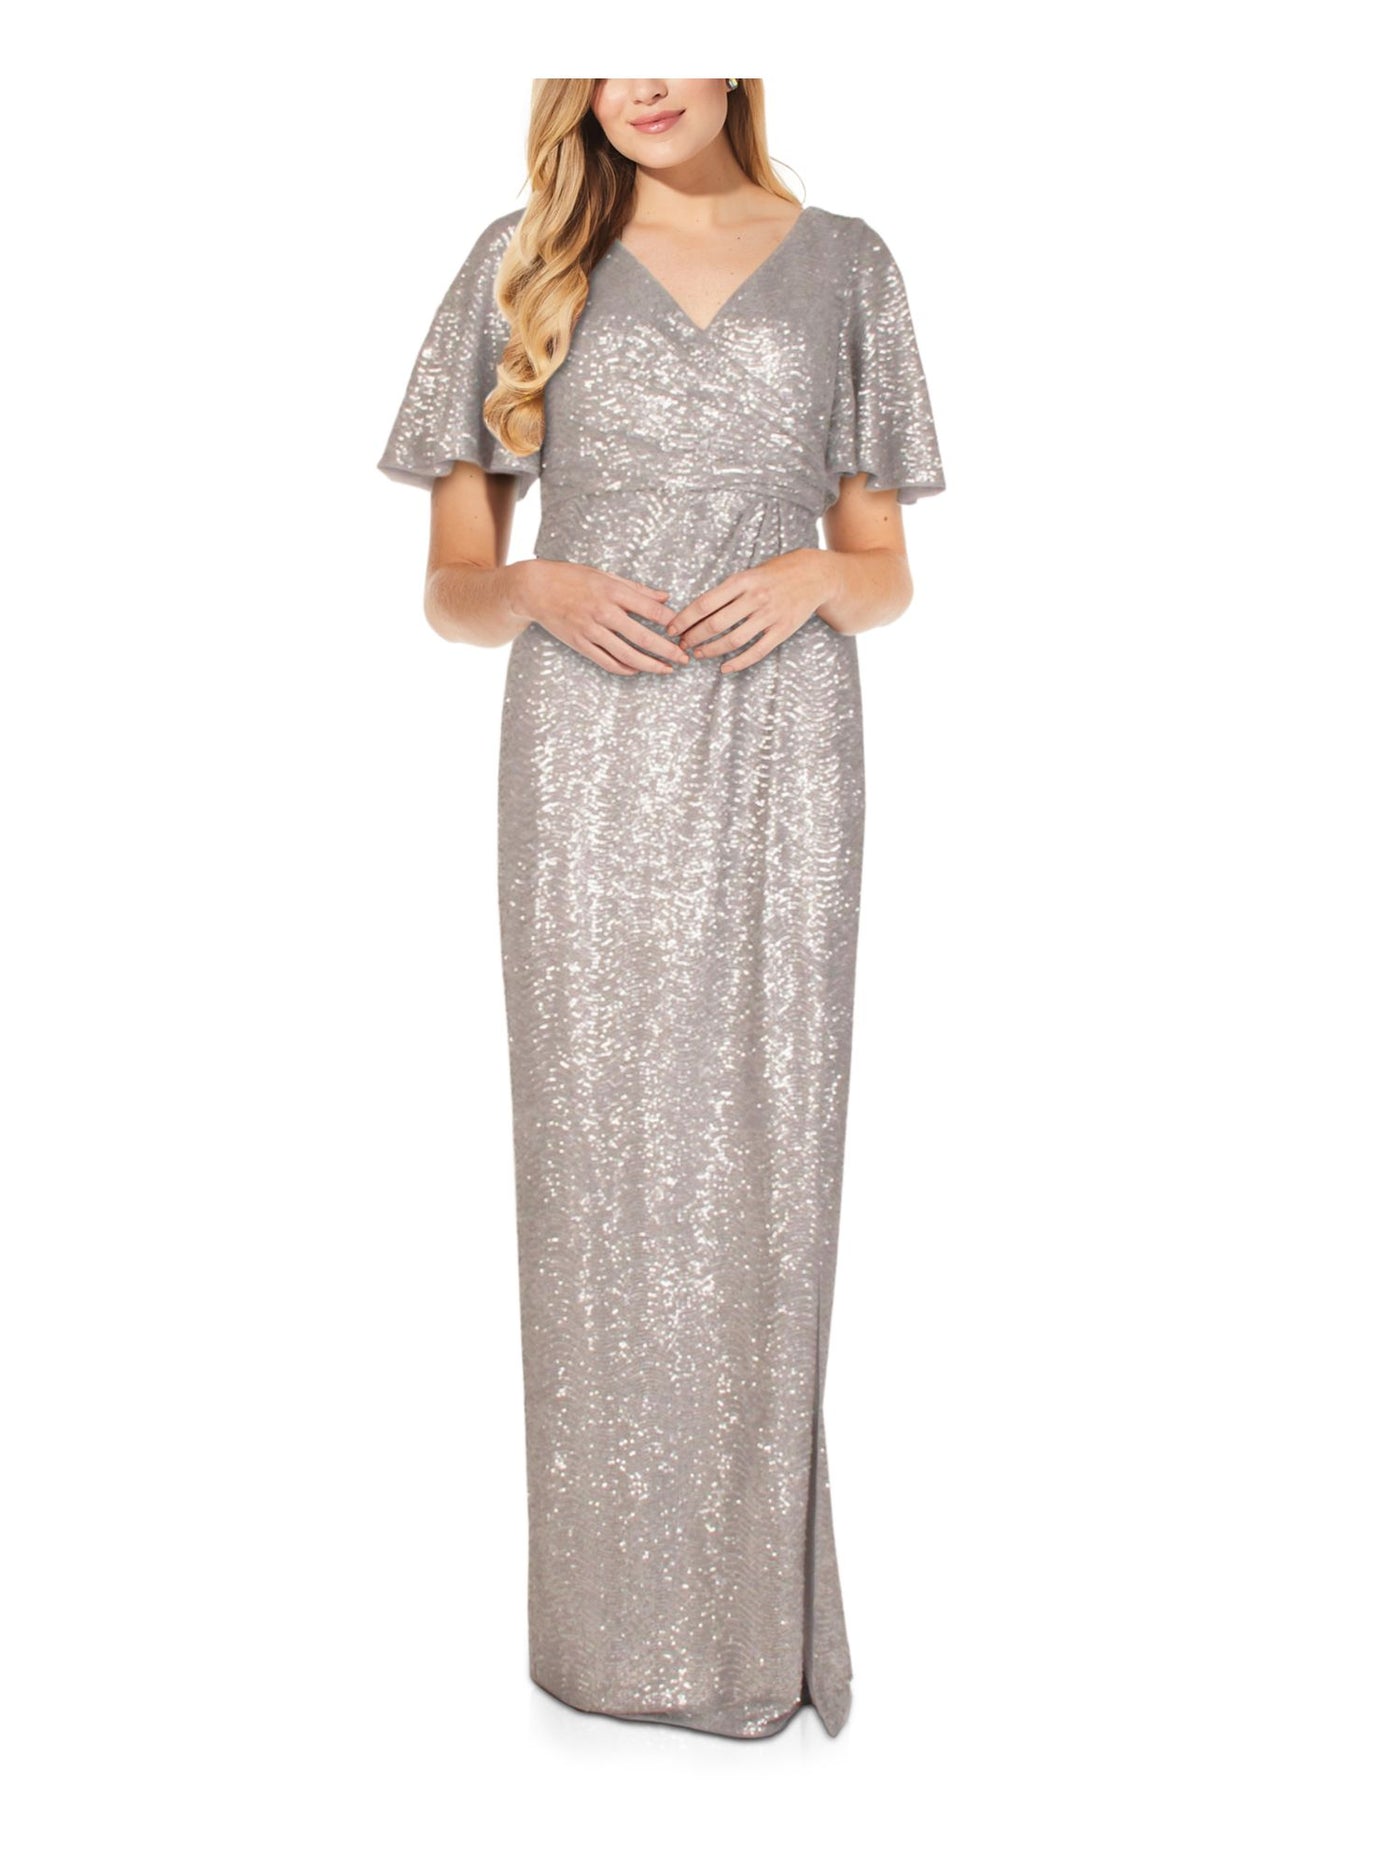 ADRIANNA PAPELL Womens Silver Sequined Zippered Pleated Slitted Draped Short Sleeve Surplice Neckline Full-Length Evening Gown Dress 8